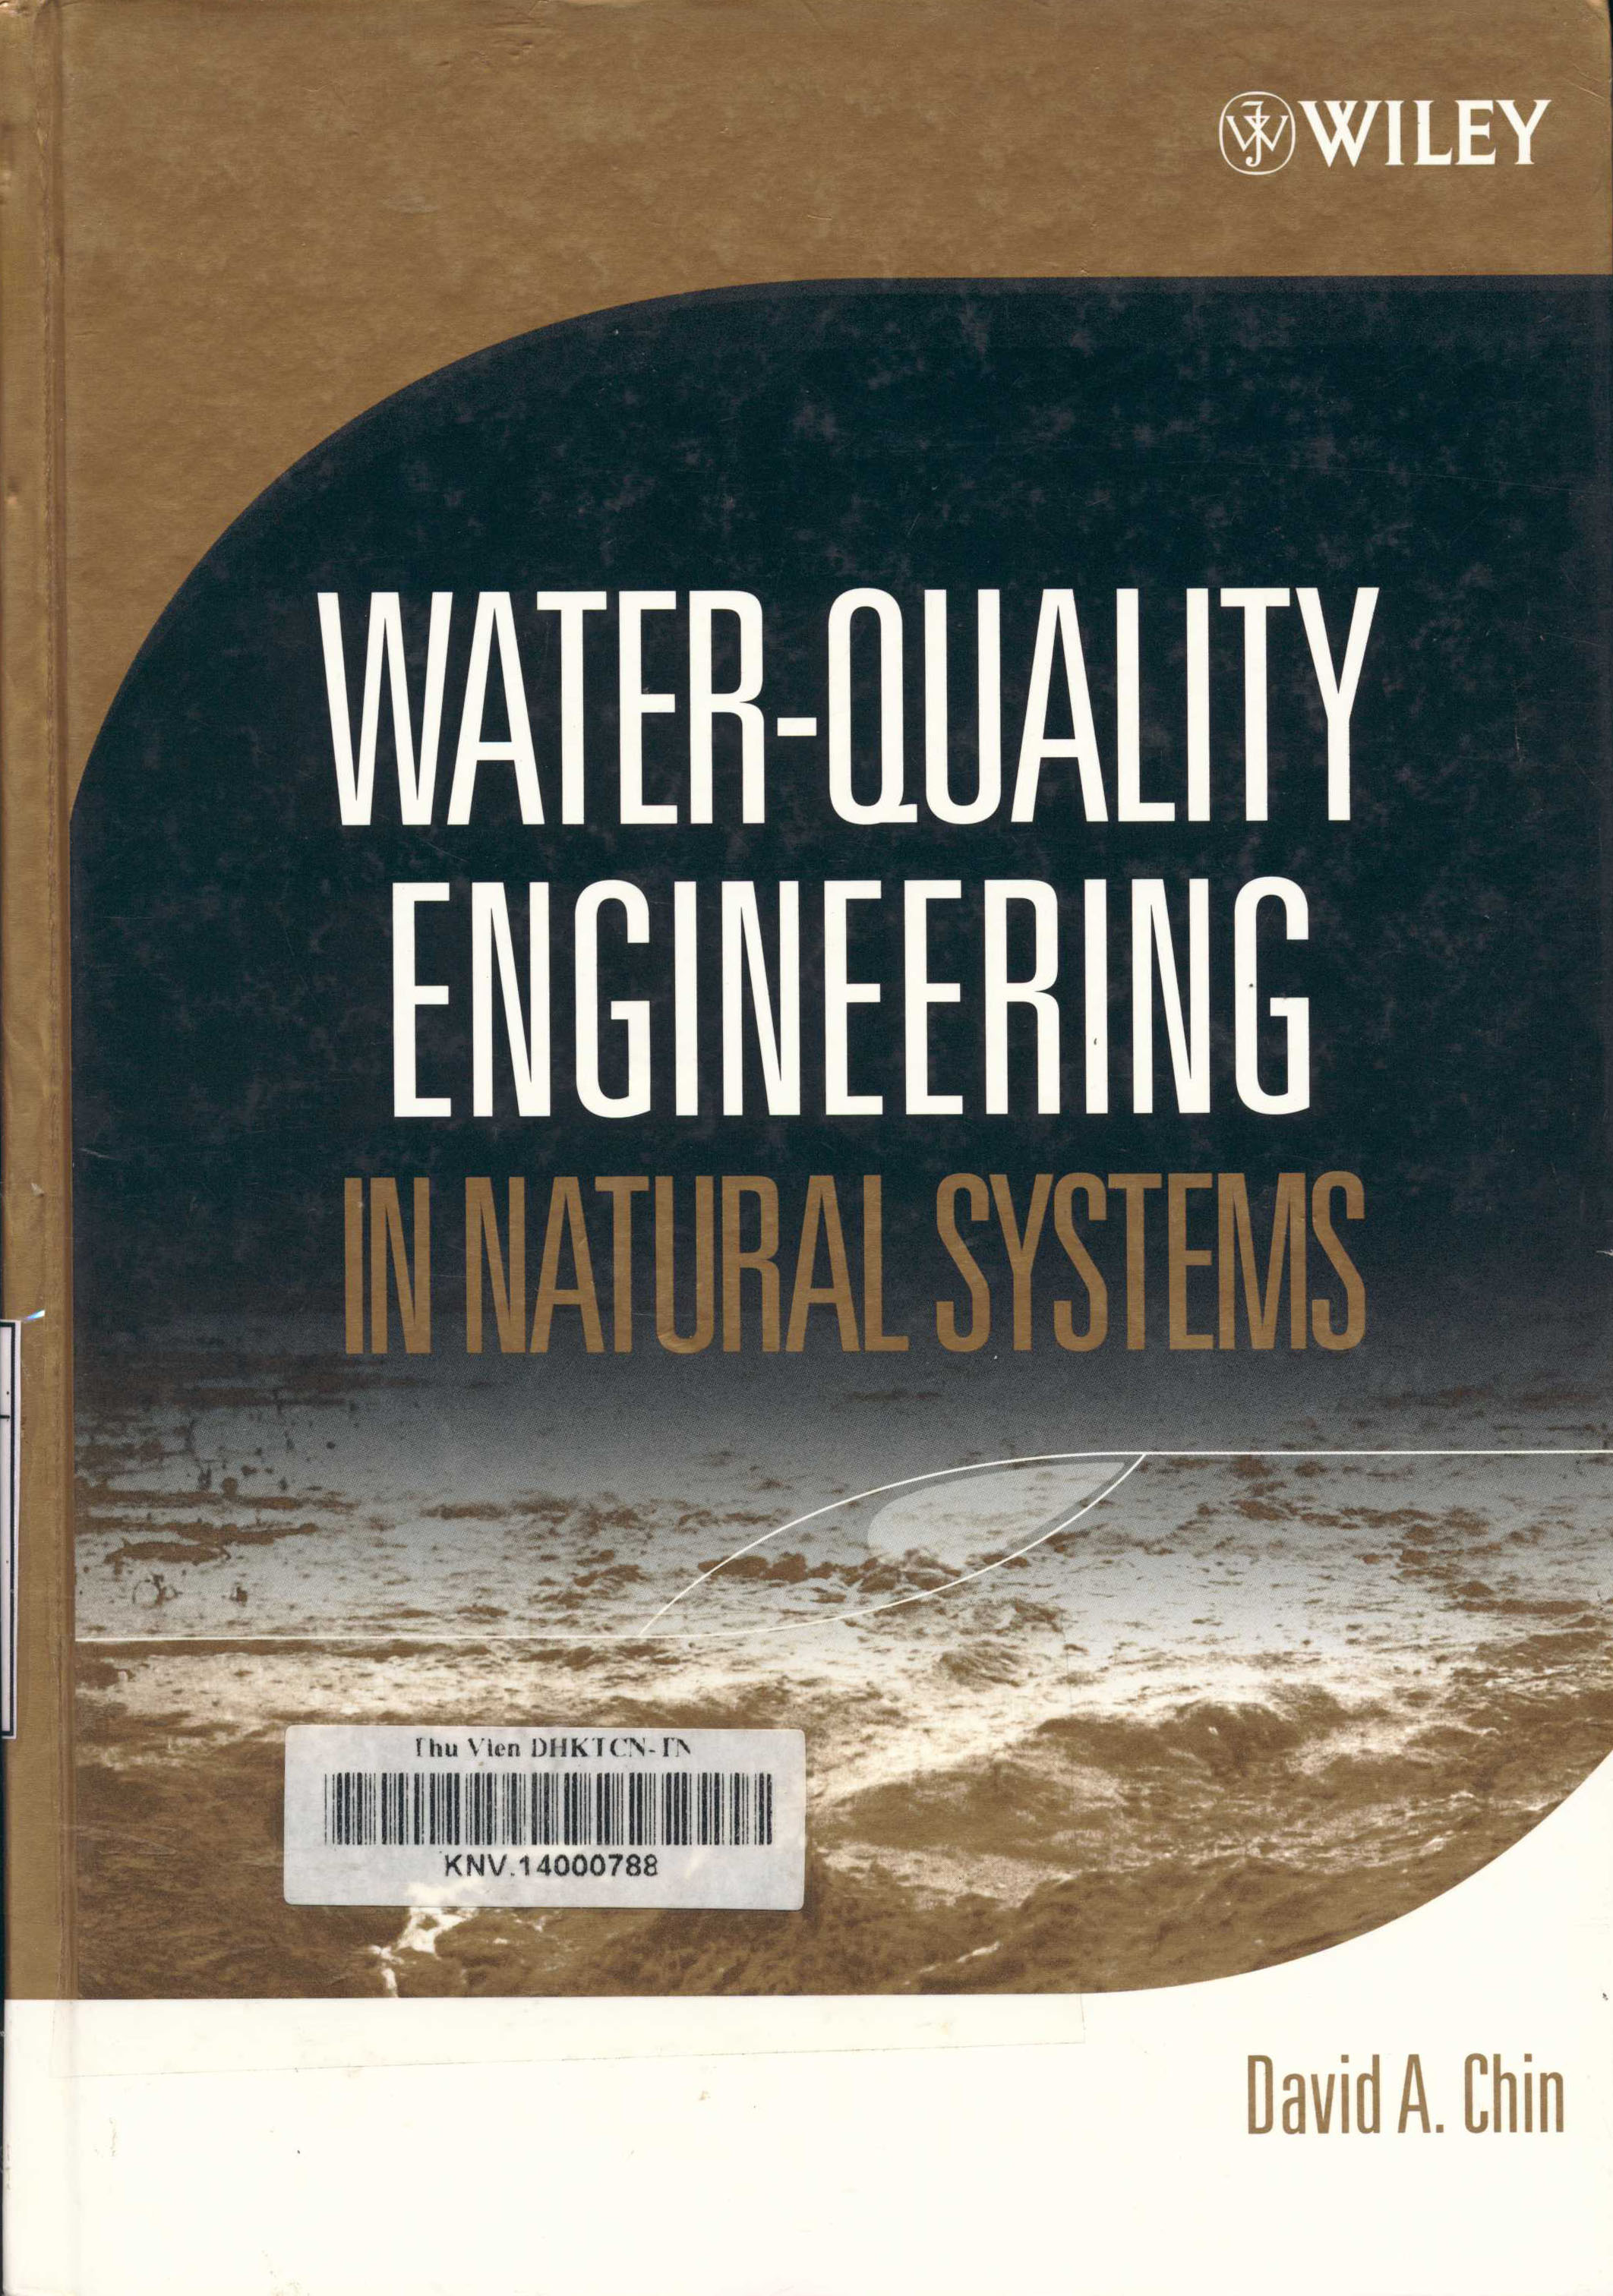 Water-quality engineering in natural systems